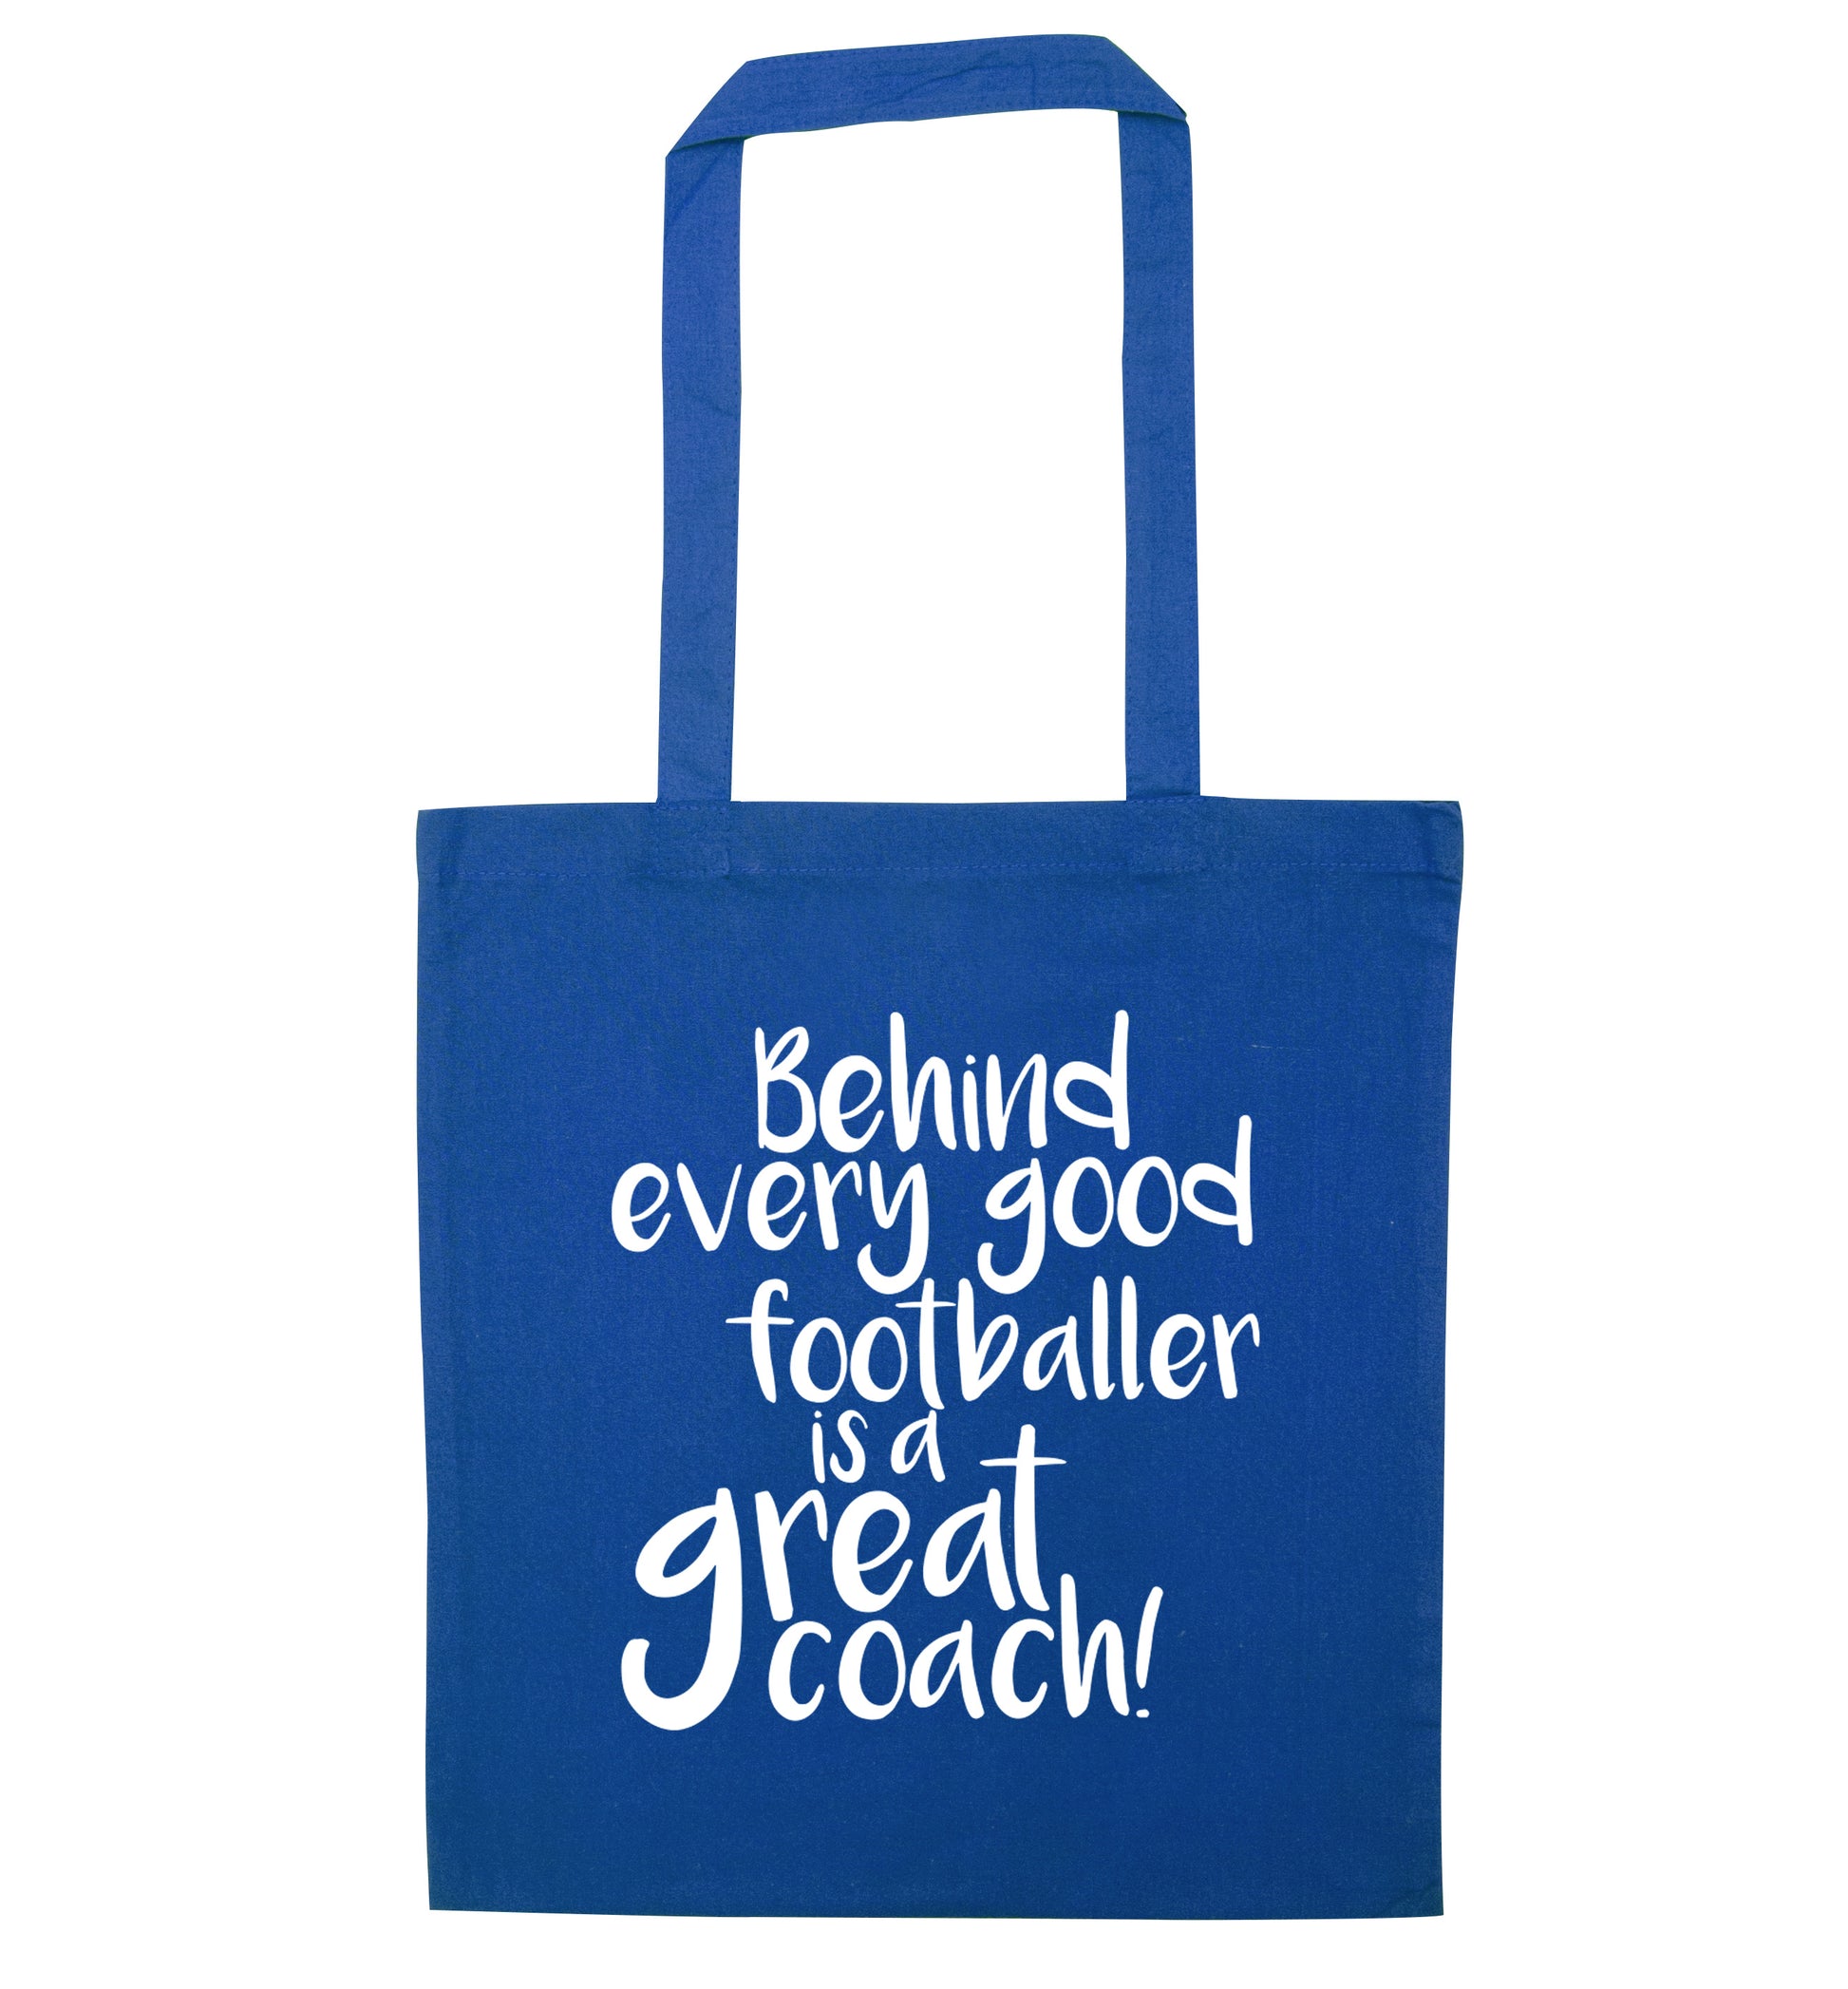 Behind every good footballer is a great coach! blue tote bag